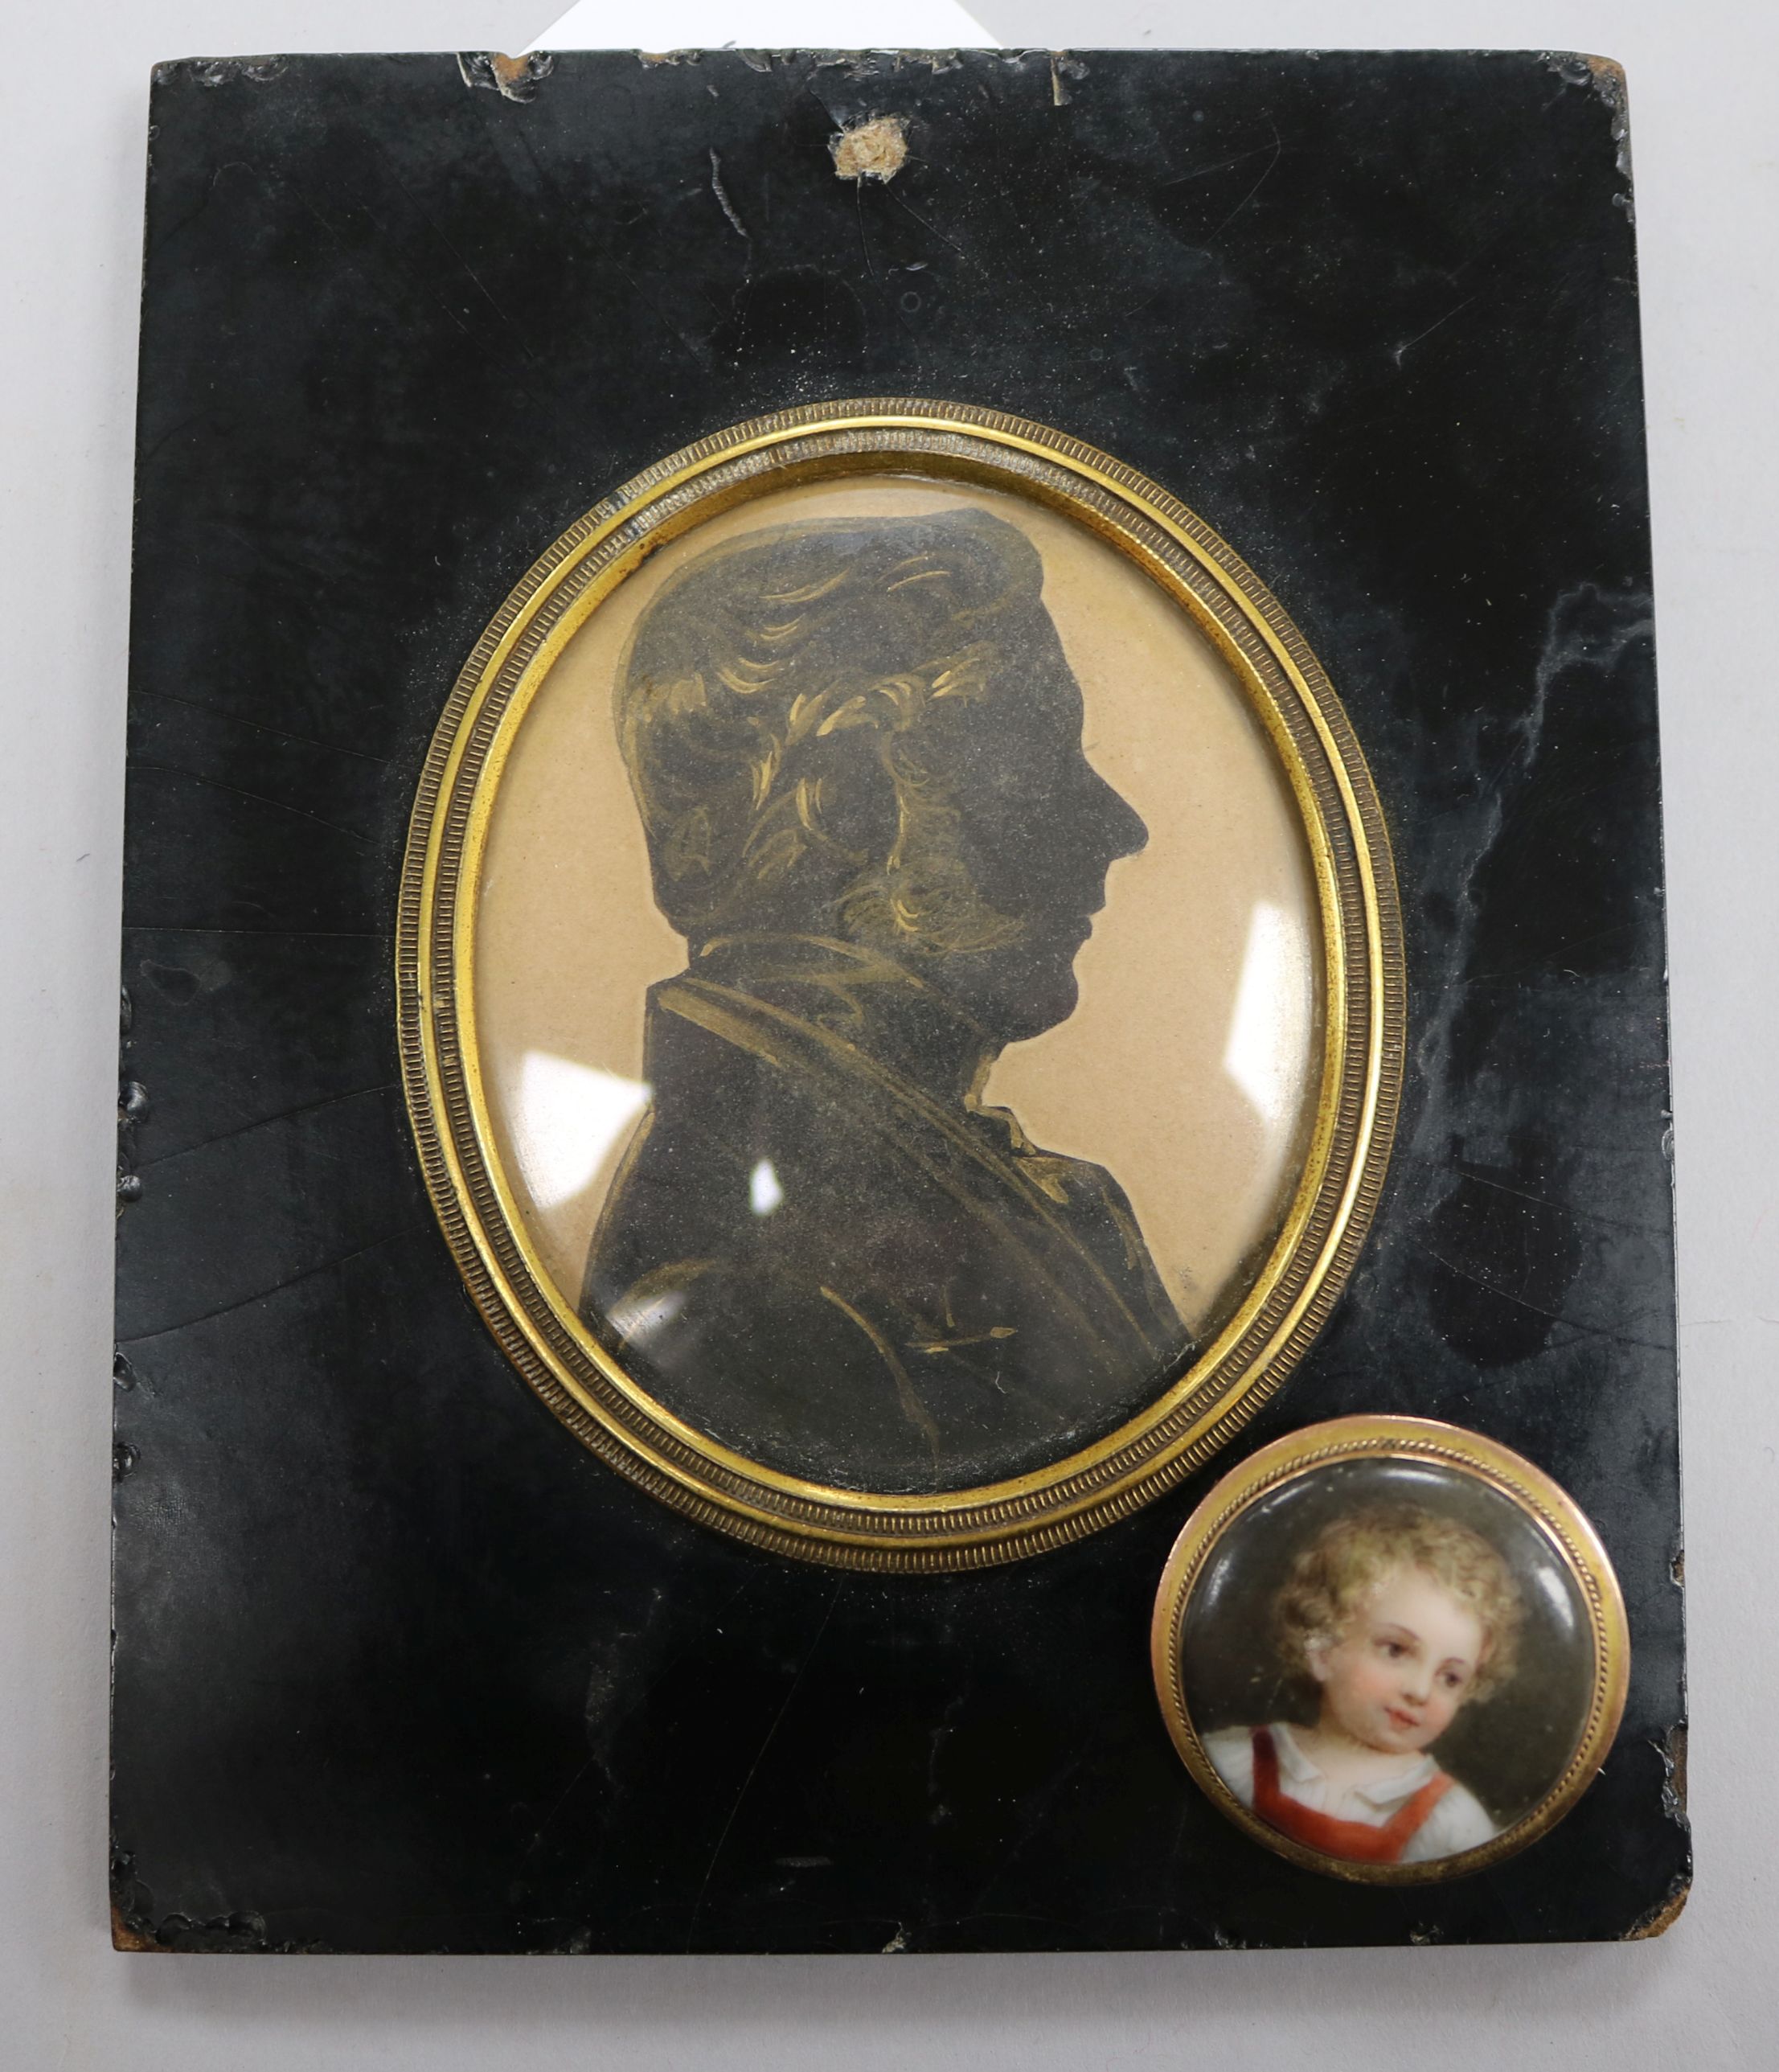 A gold mounted portrait miniature brooch and a silhouette of a gentleman